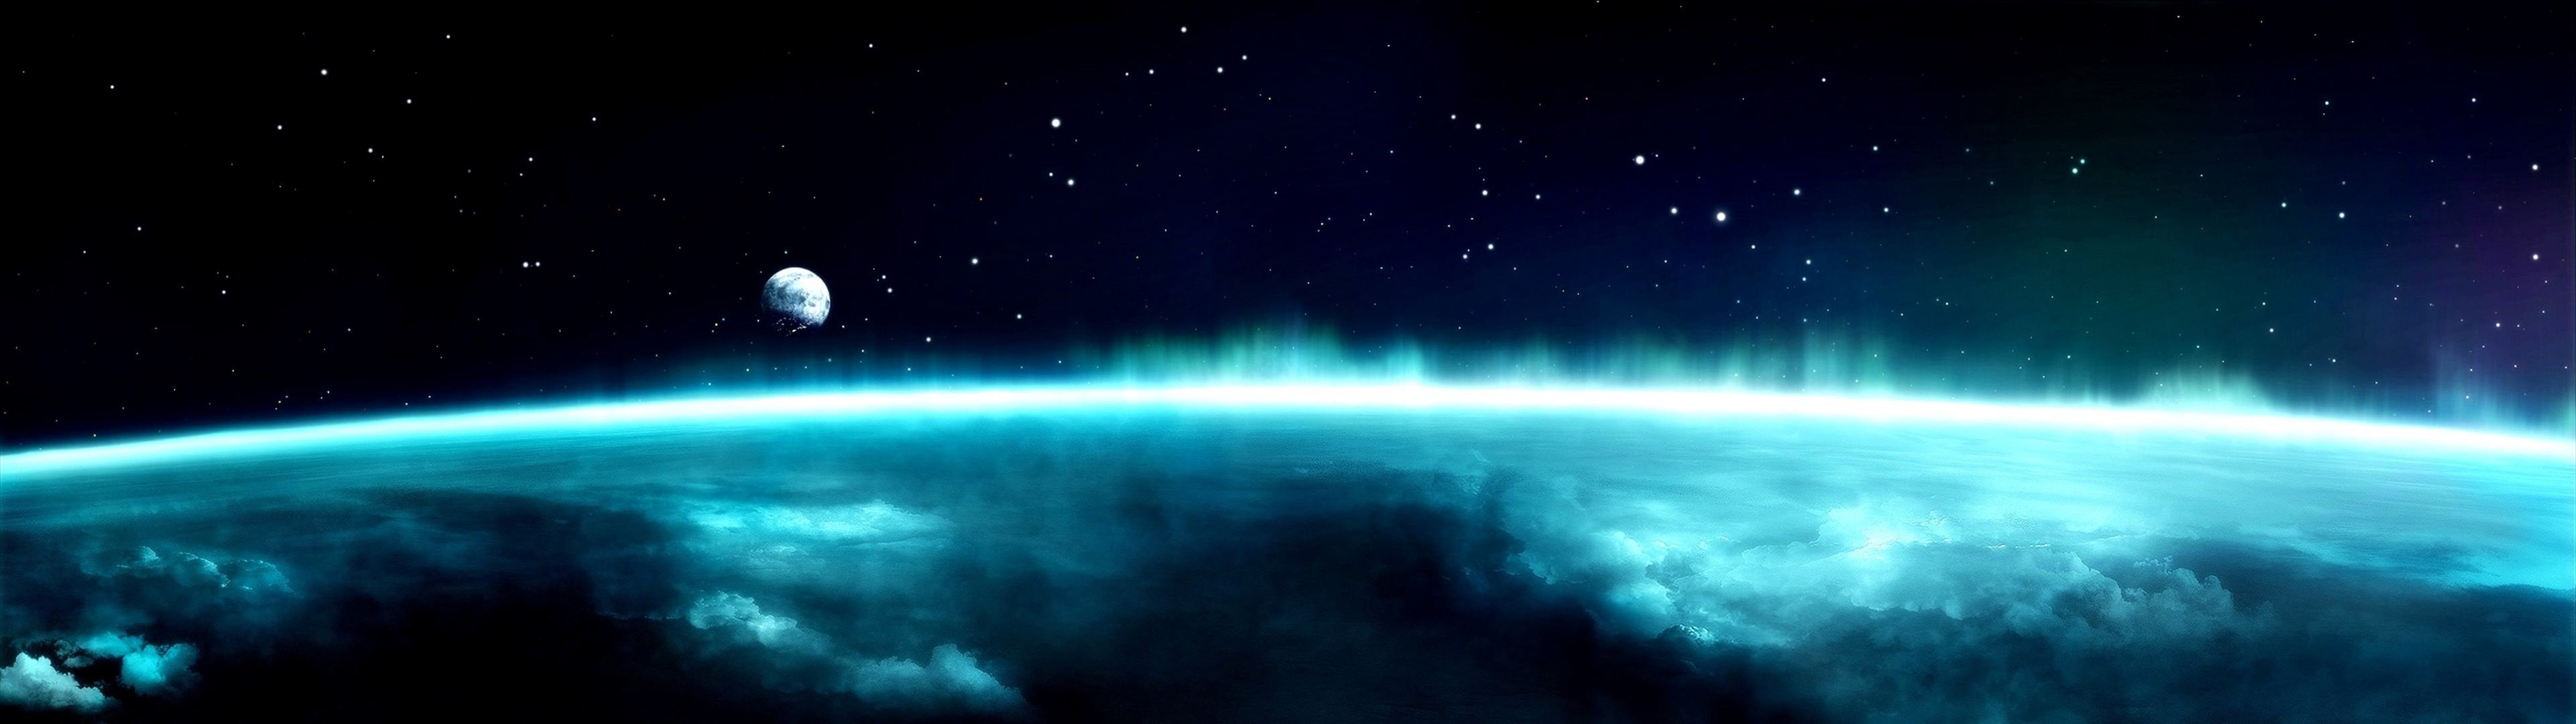 4480x1080 wallpaper,atmosphere,outer space,nature,sky,astronomical object